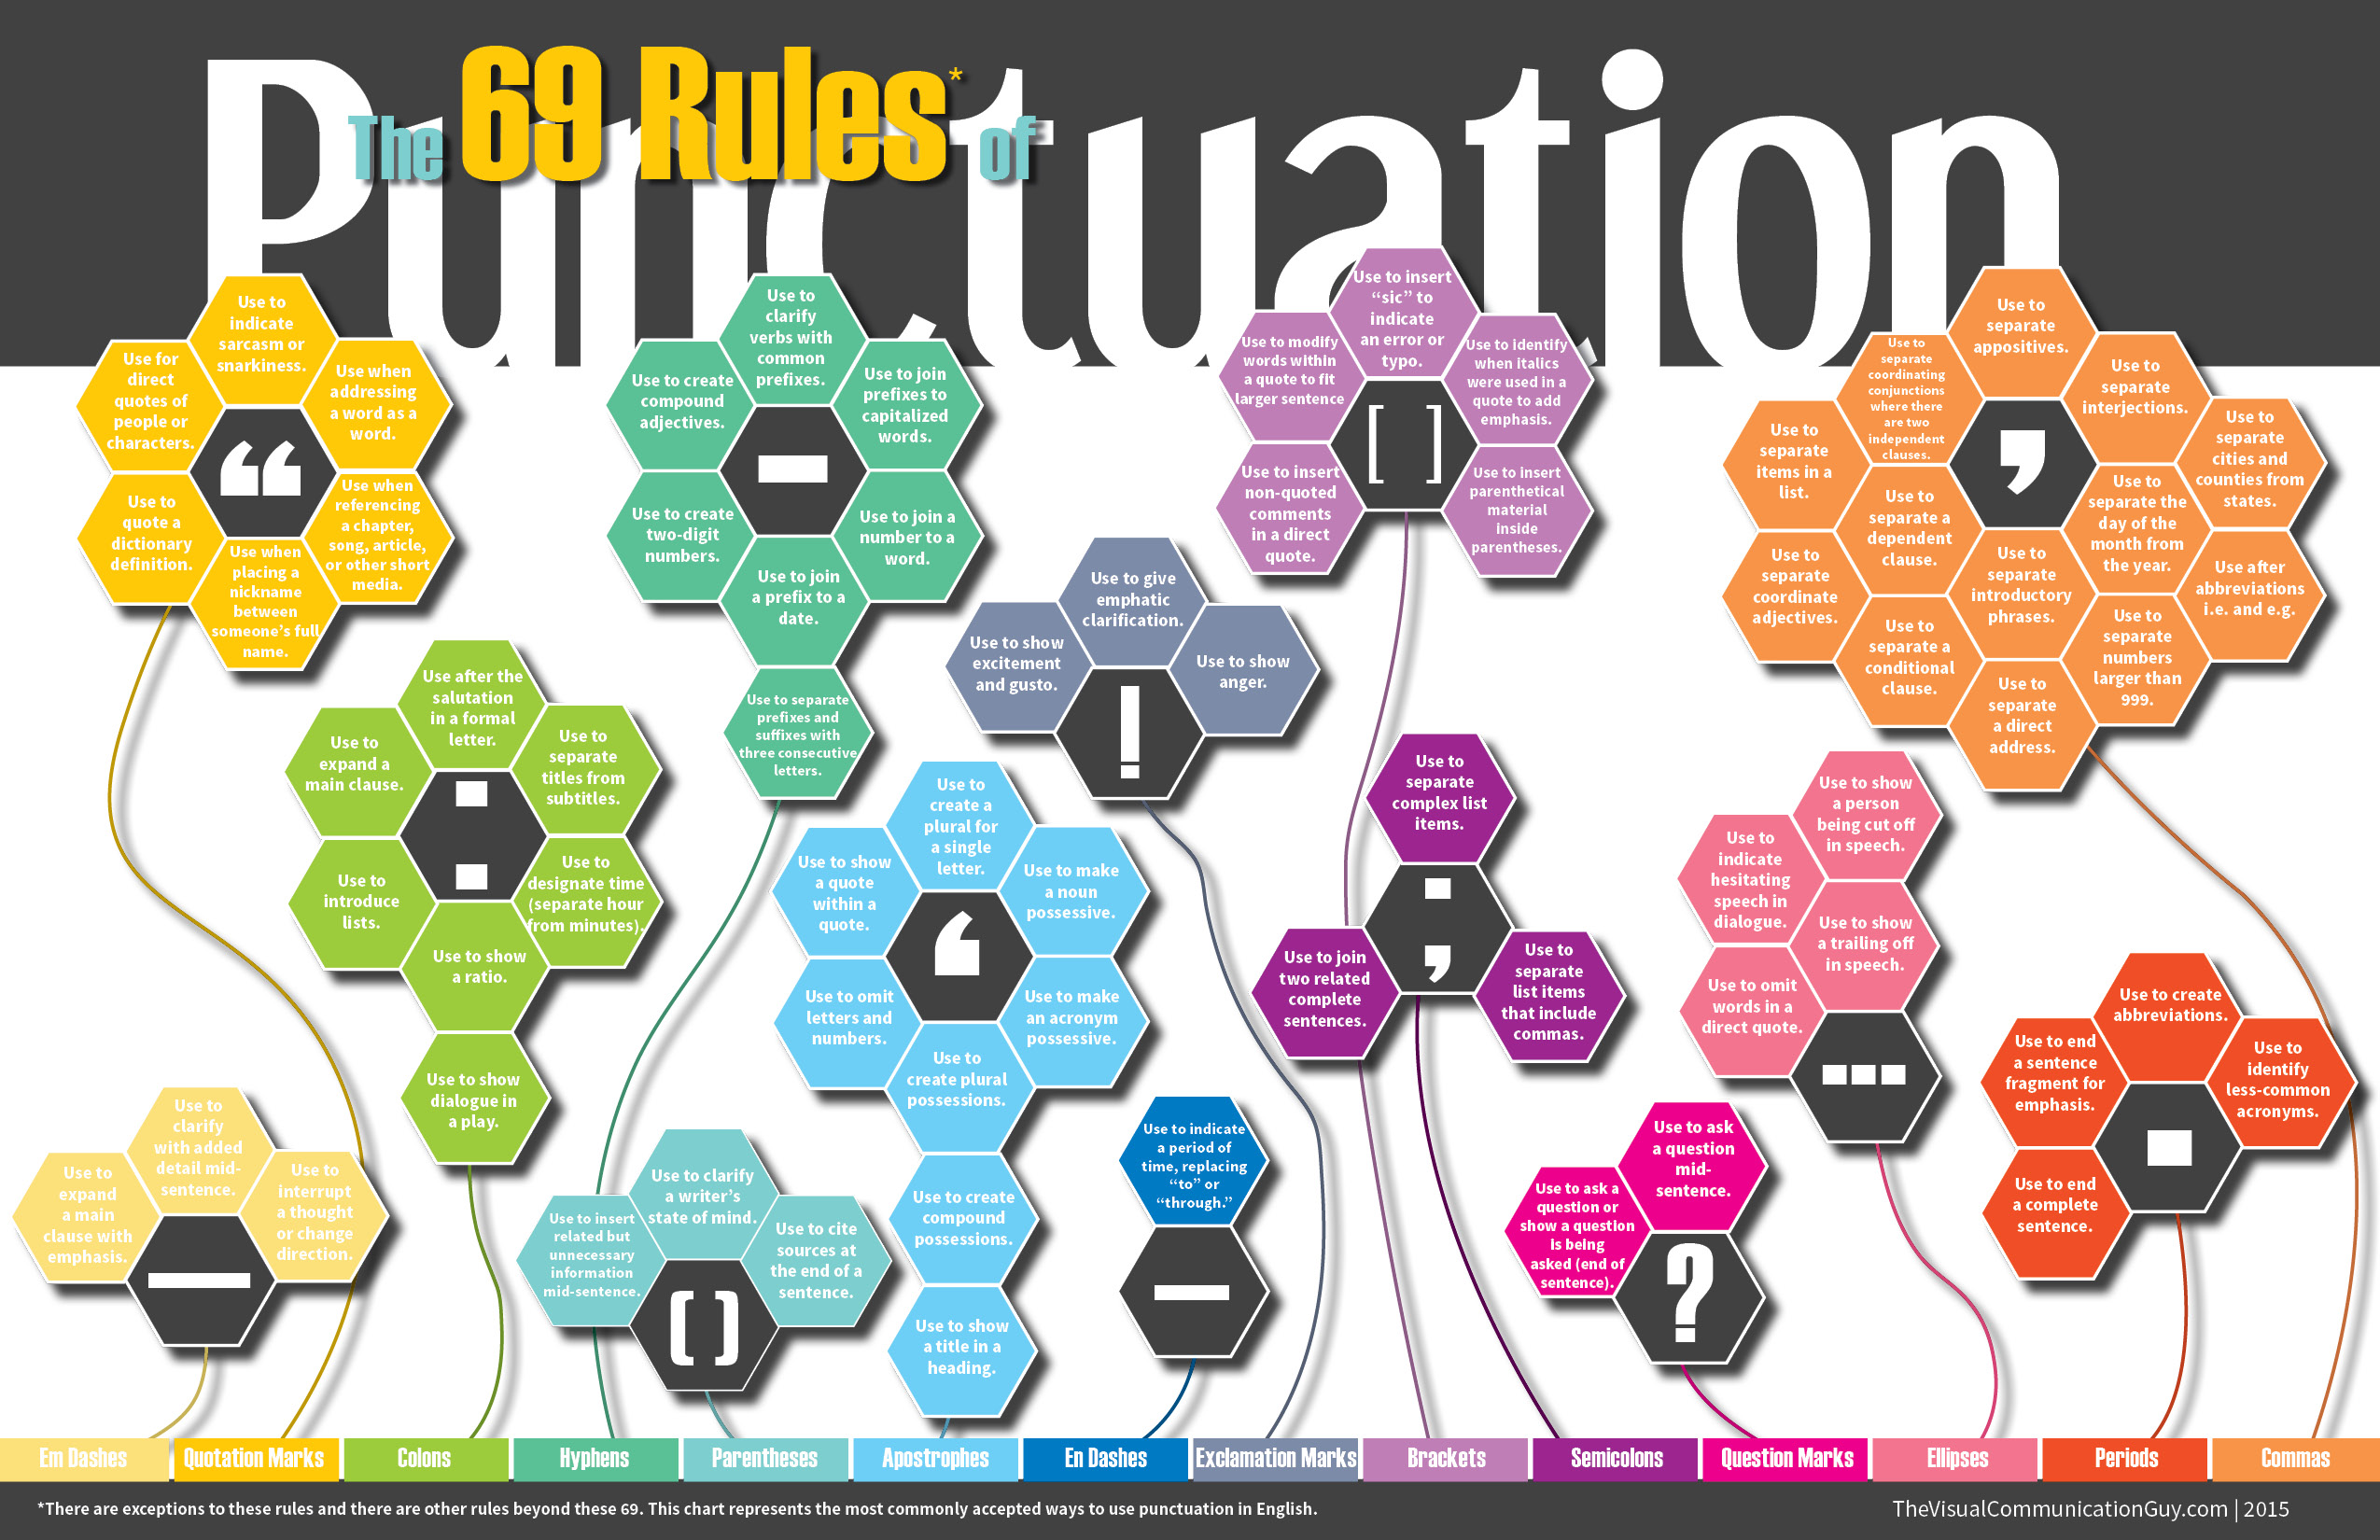 The 69 Rules of Punctuation infographic